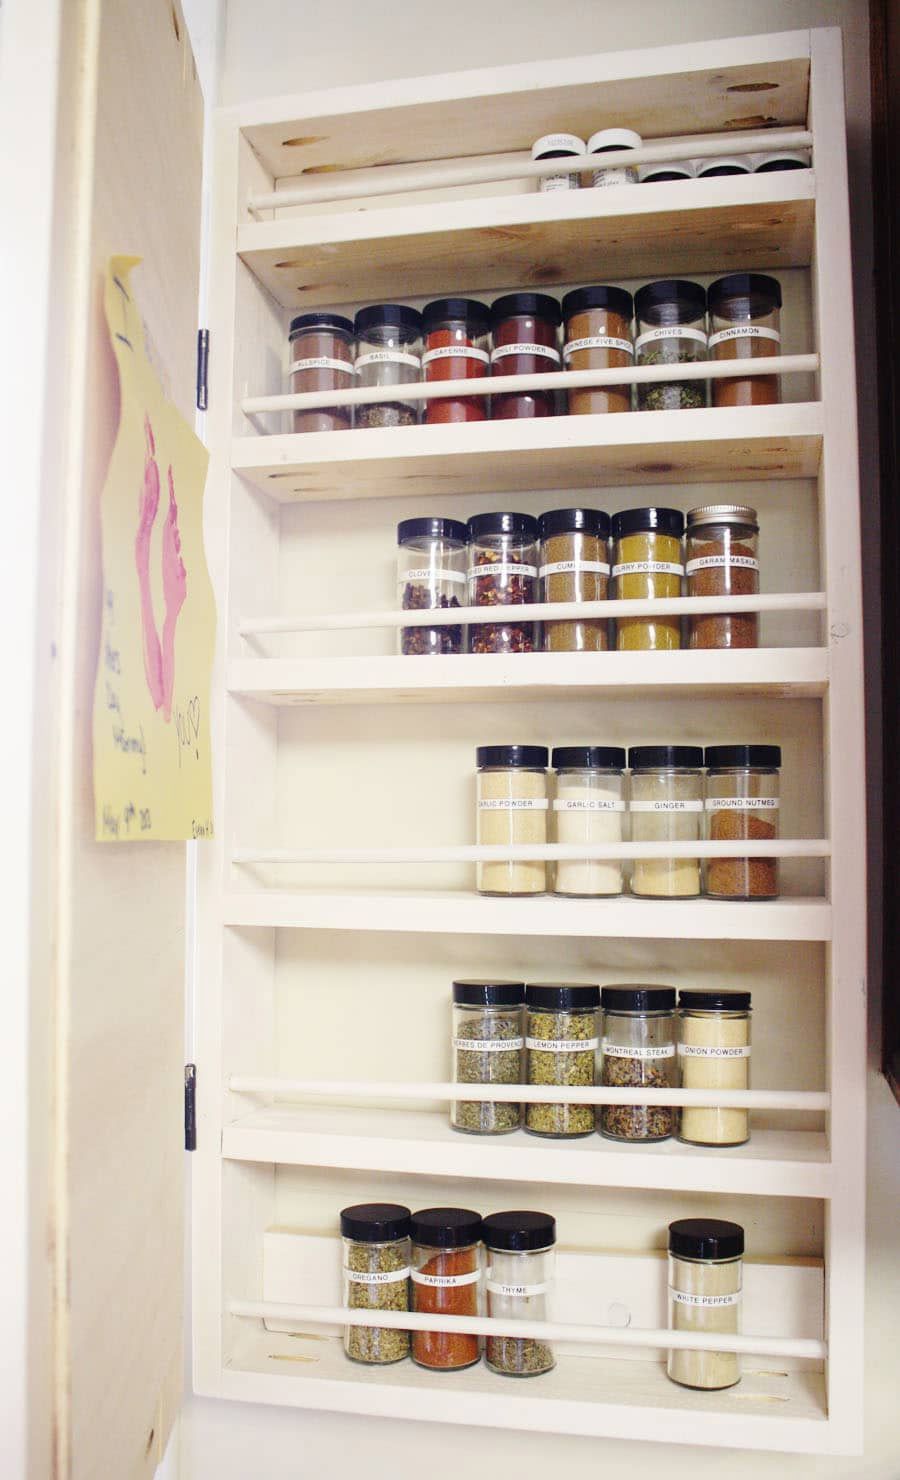 A DIY spice rack mounted on the wall